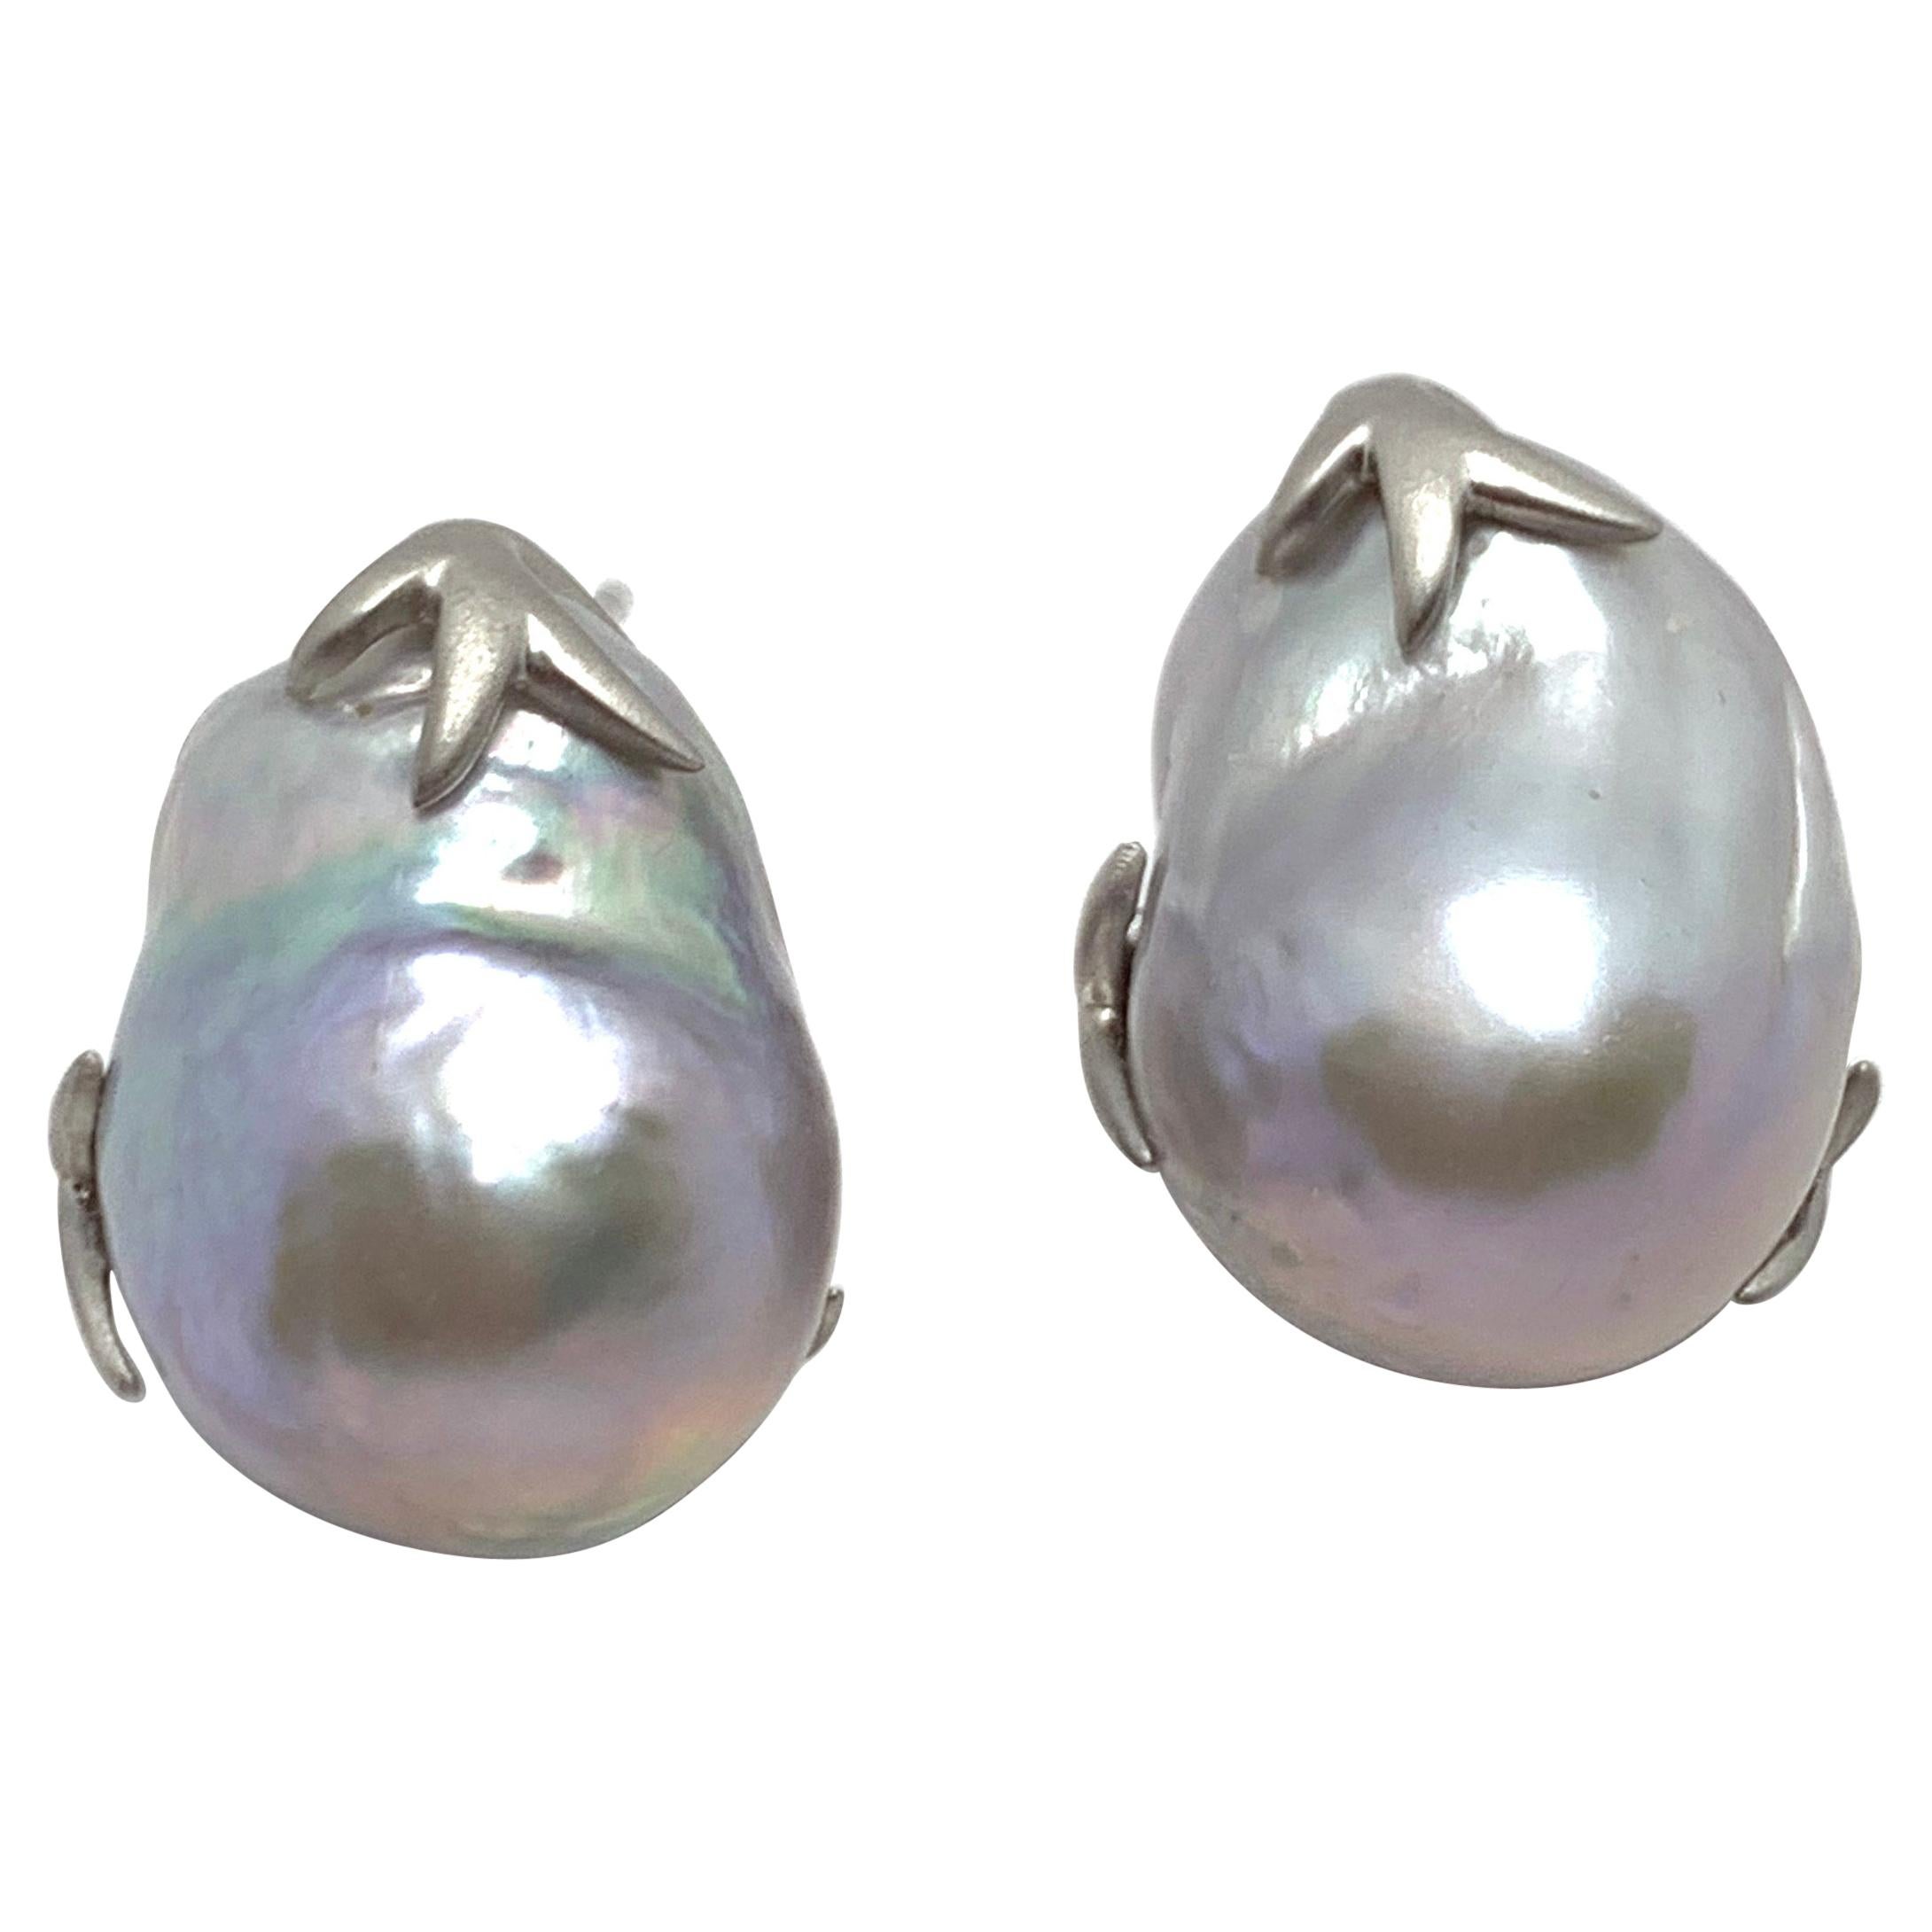 Large Lustrous pair of 15mm Grey Cultured Baroque Pearl Earrings